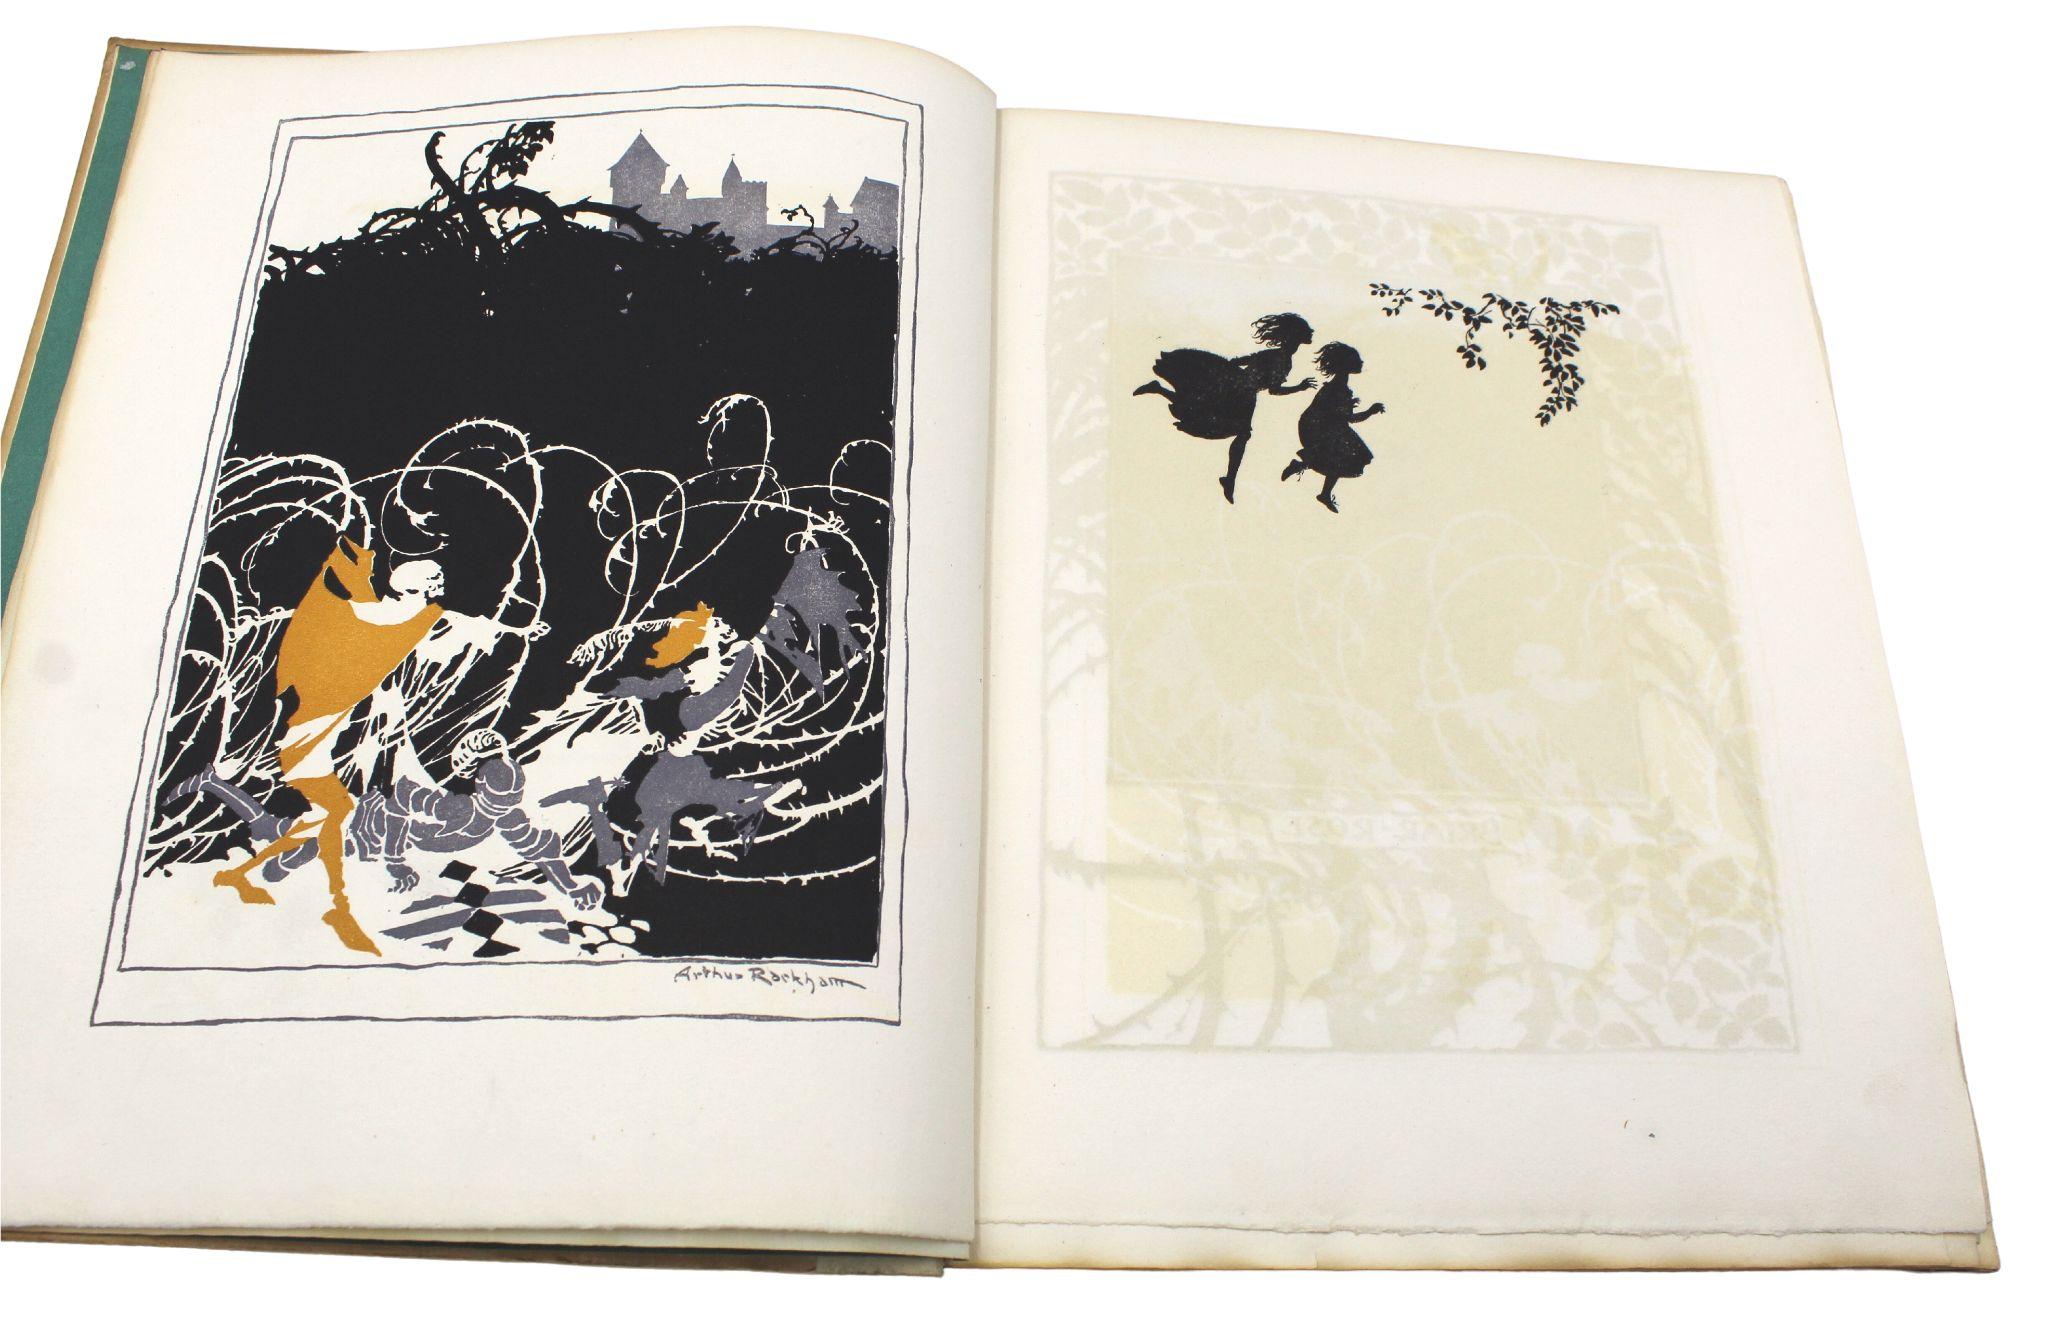 Embossed The Sleeping Beauty, by C. S. Evans, Signed by Arthur Rackham, Limited Edition For Sale